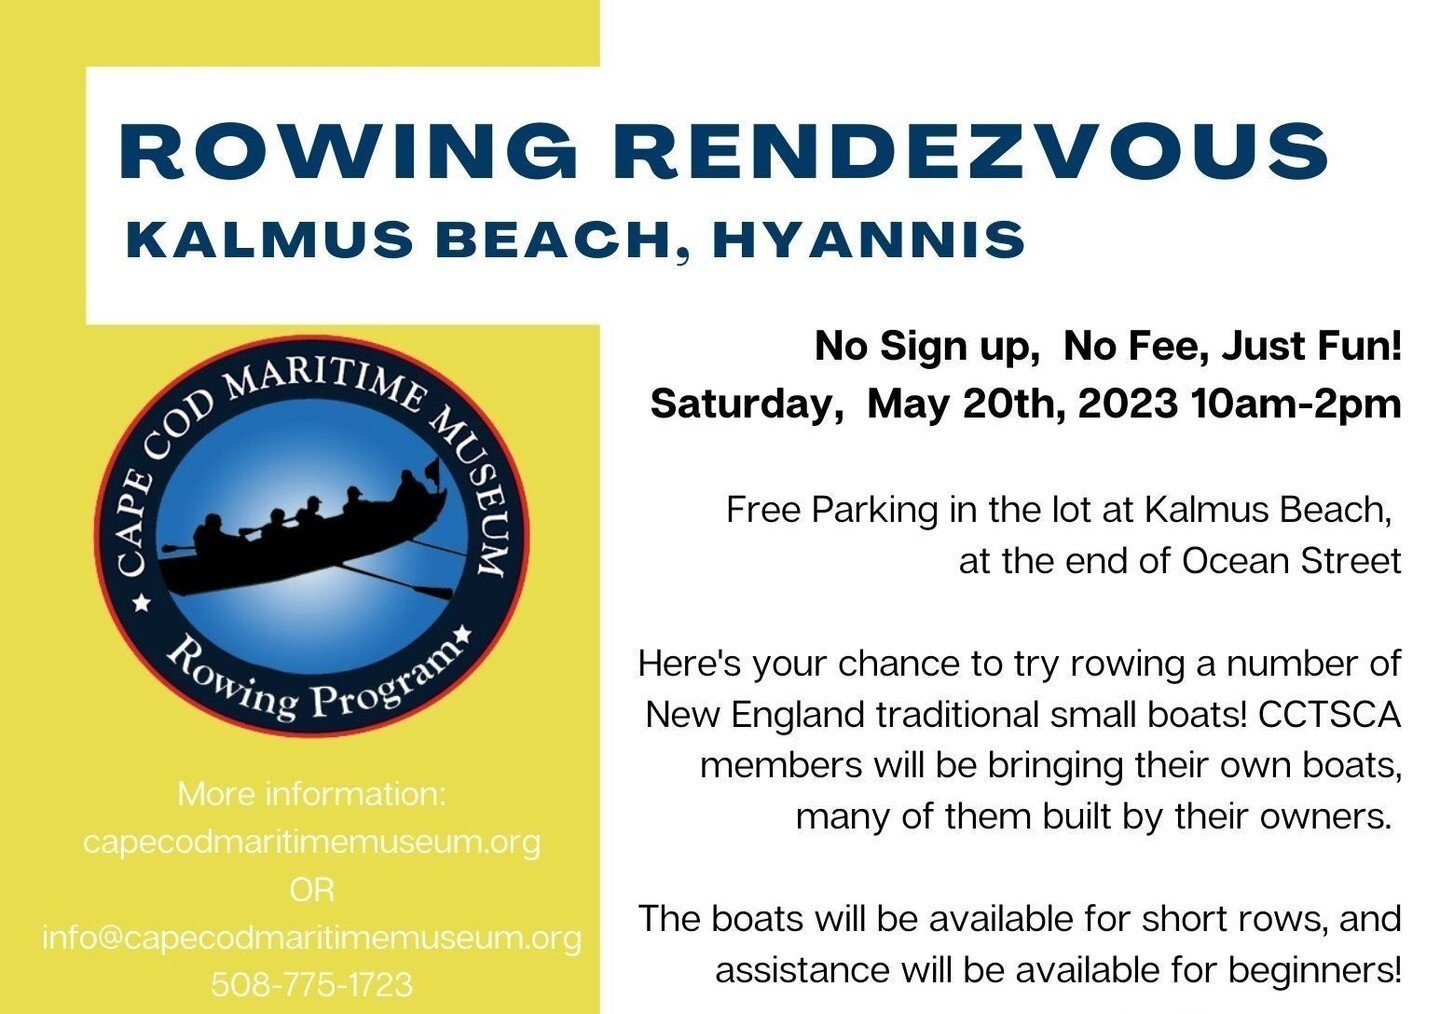 RESCHEDULED! Due to inclement weather, the Rowing Rendezvous has been rescheduled to Sunday, May 21, same time, same place. We'll see you there!